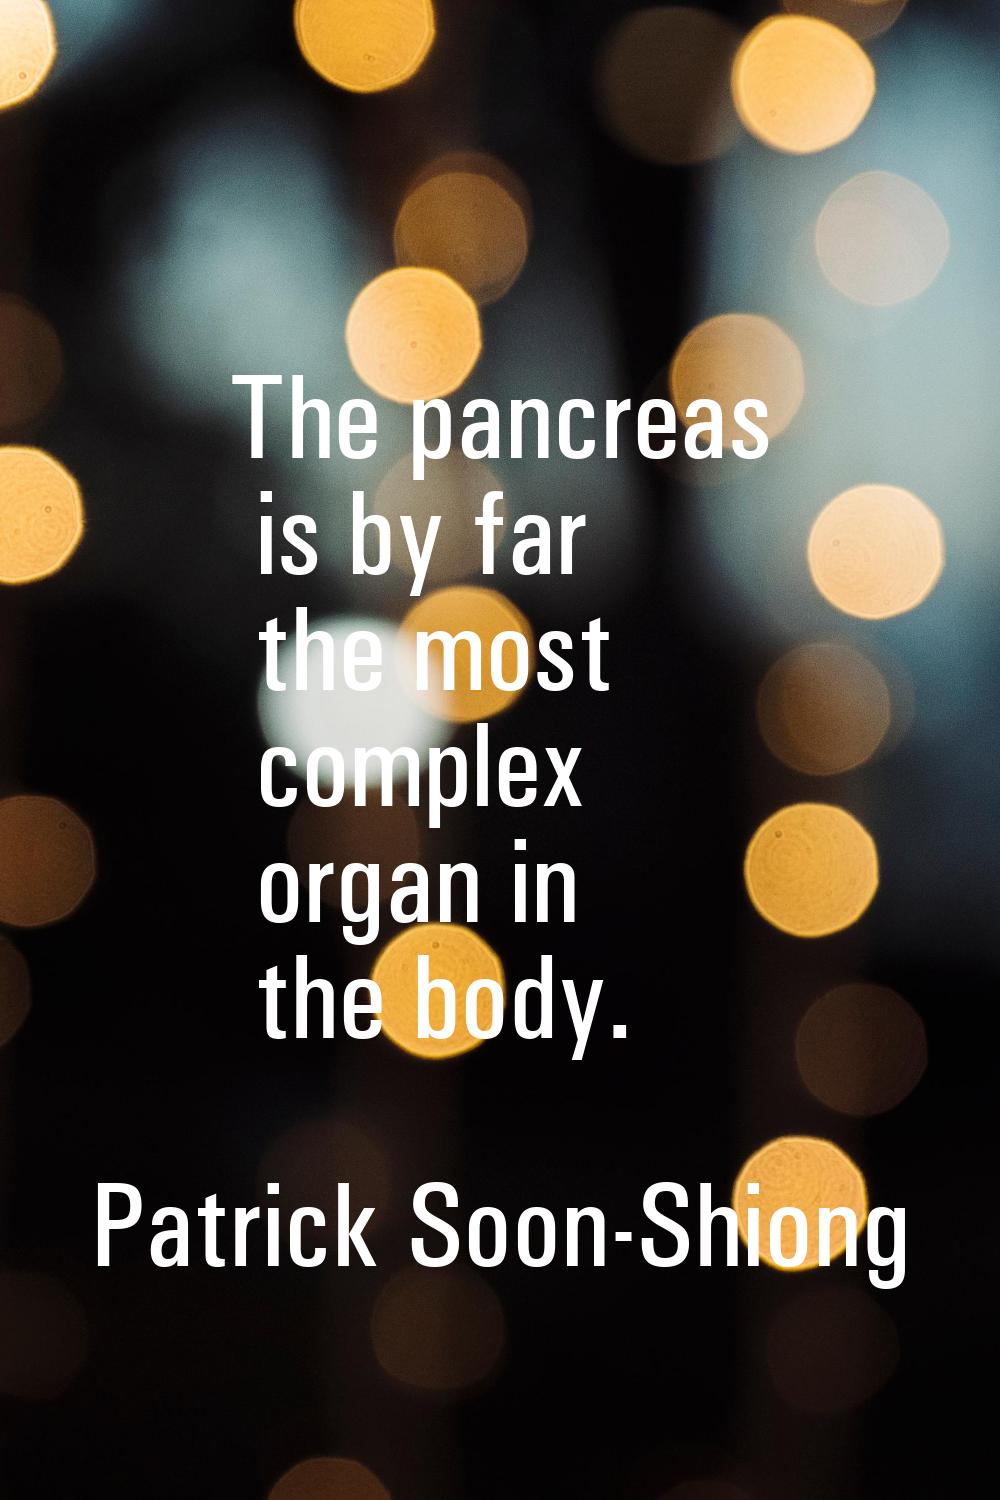 The pancreas is by far the most complex organ in the body.